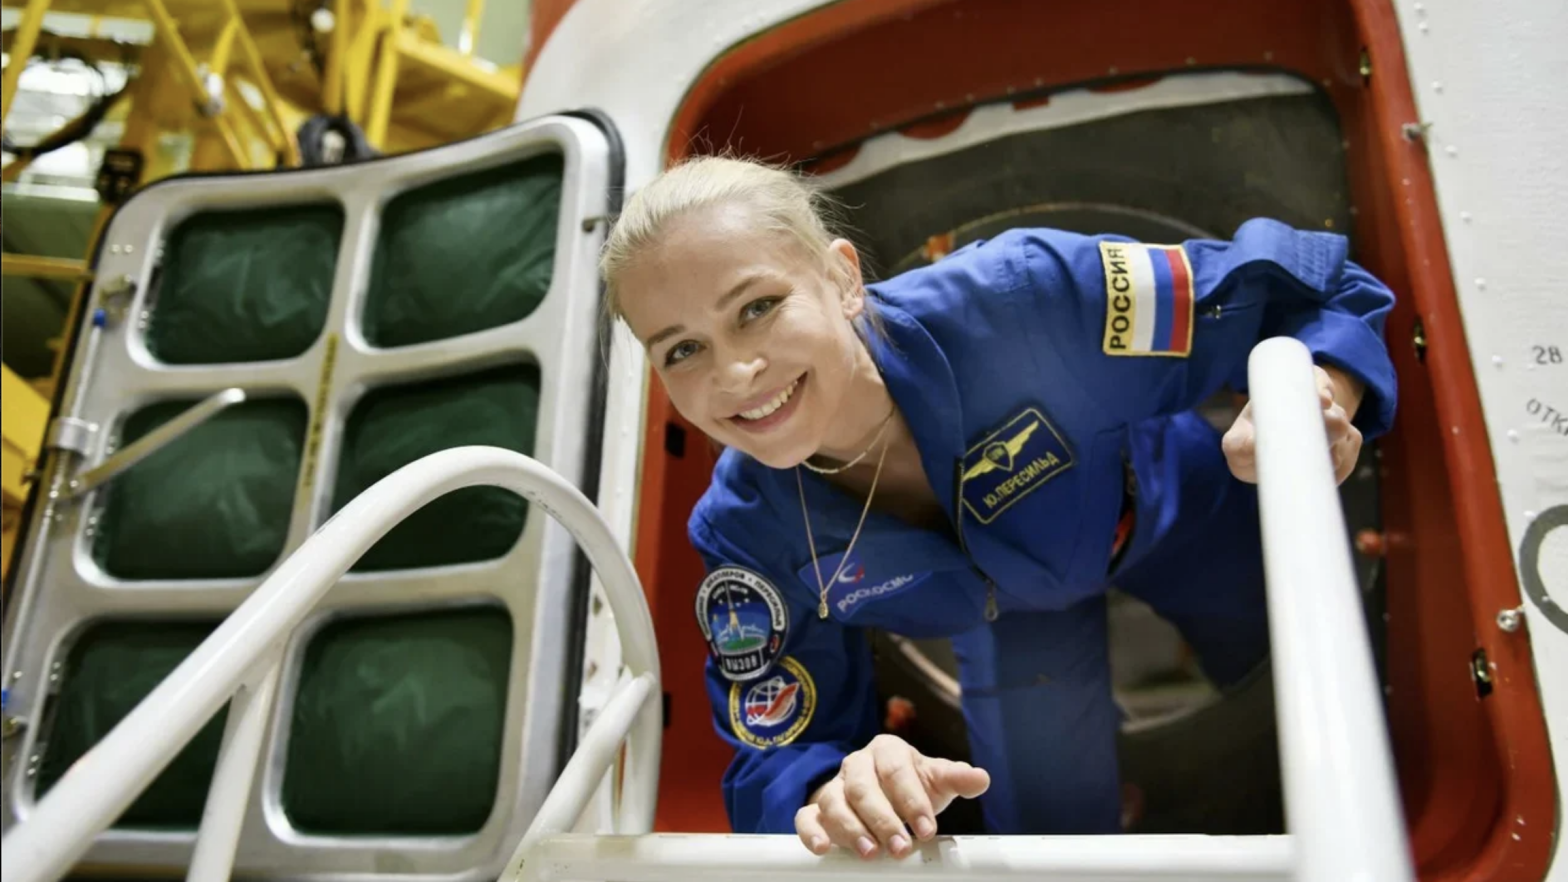 Actress Yulia Peresild preparing for the mission at the Yuri Gagarin Cosmonaut Training Centre. (Image: Channel One Russia)